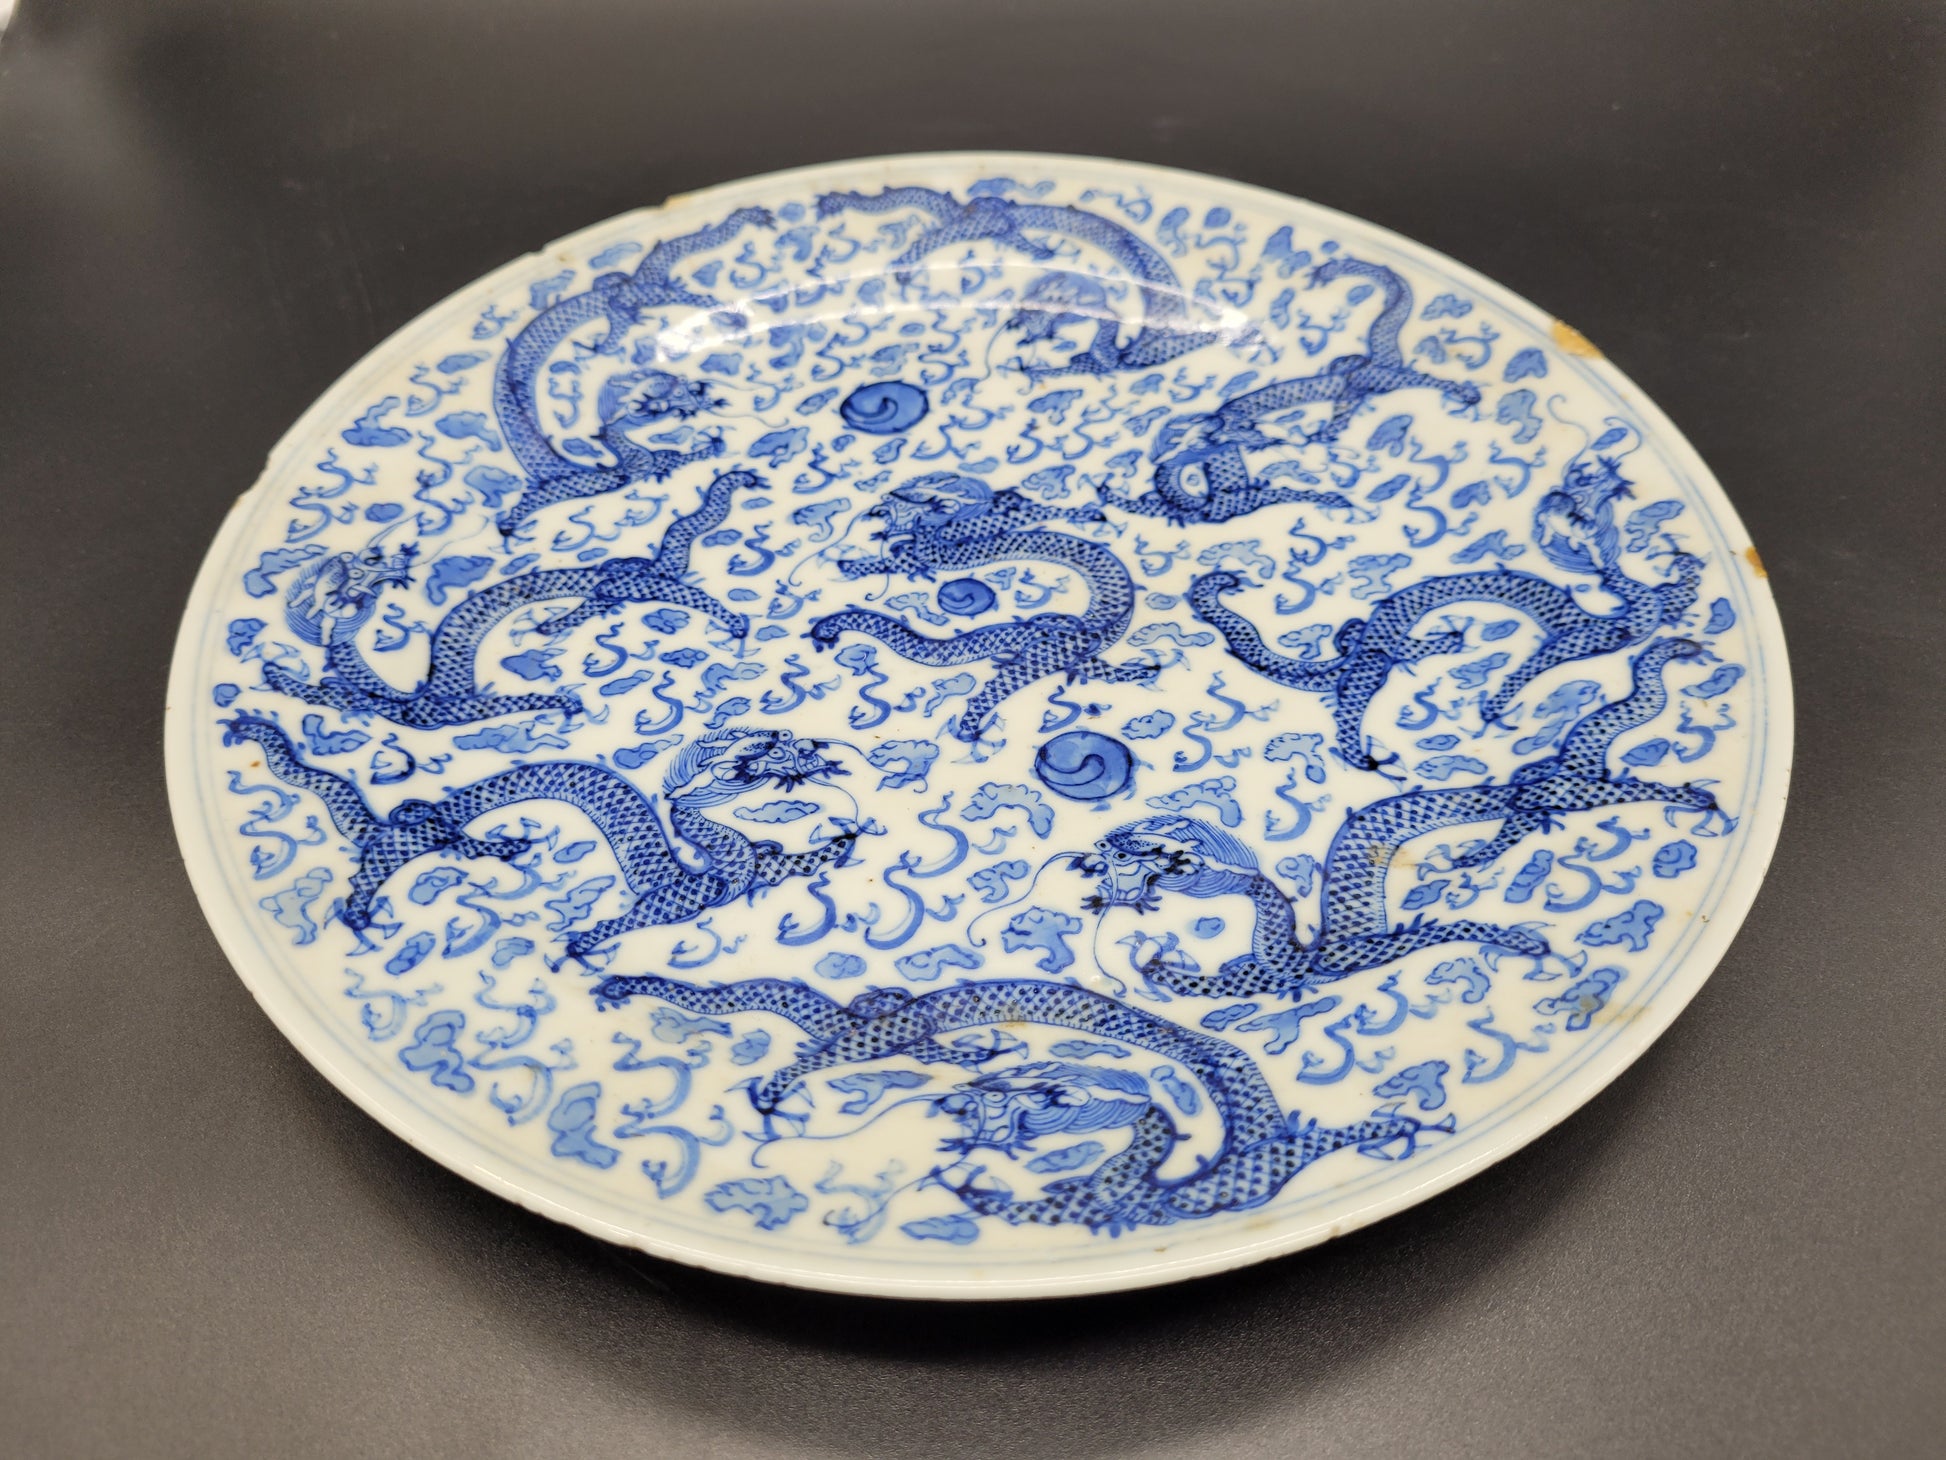 BUY ANTIQUES ONLINE USA Beautiful Chinese Kangxi Period ( 1662-1722 ) Blue and White Dragon Plate 